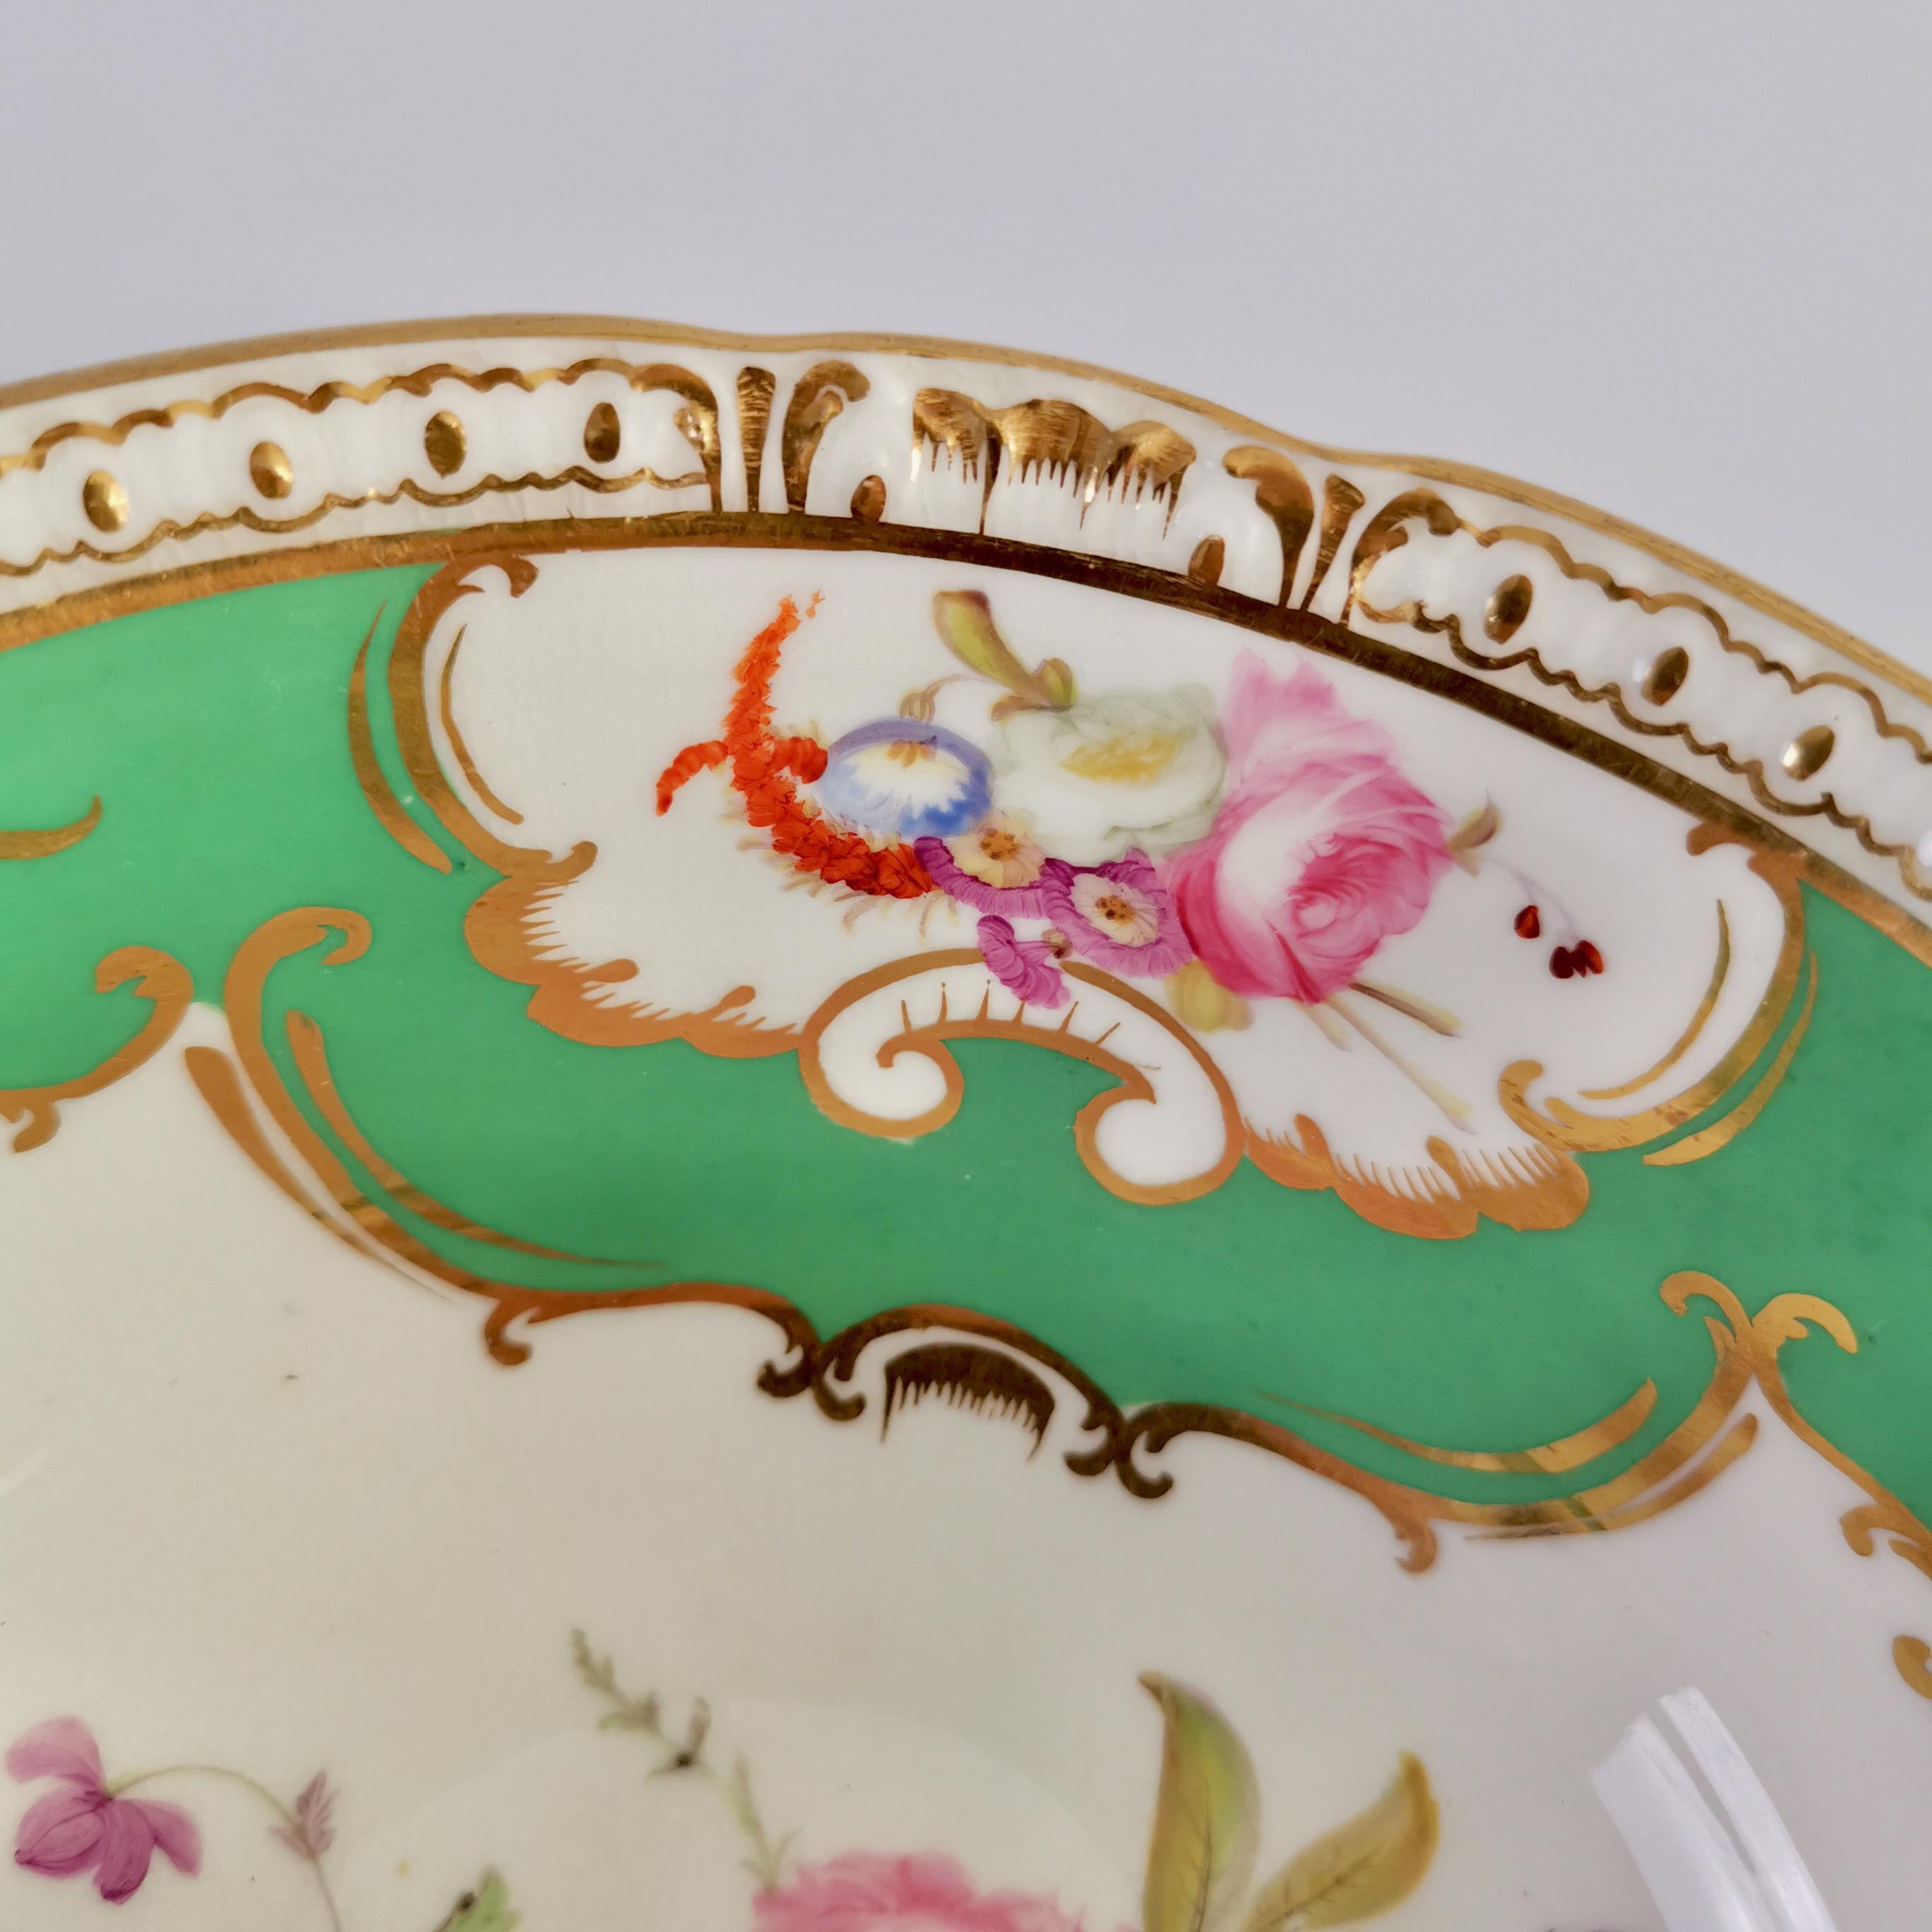 Early 19th Century Coalport Porcelain Slop Bowl, Green with Flowers, Regency, circa 1826